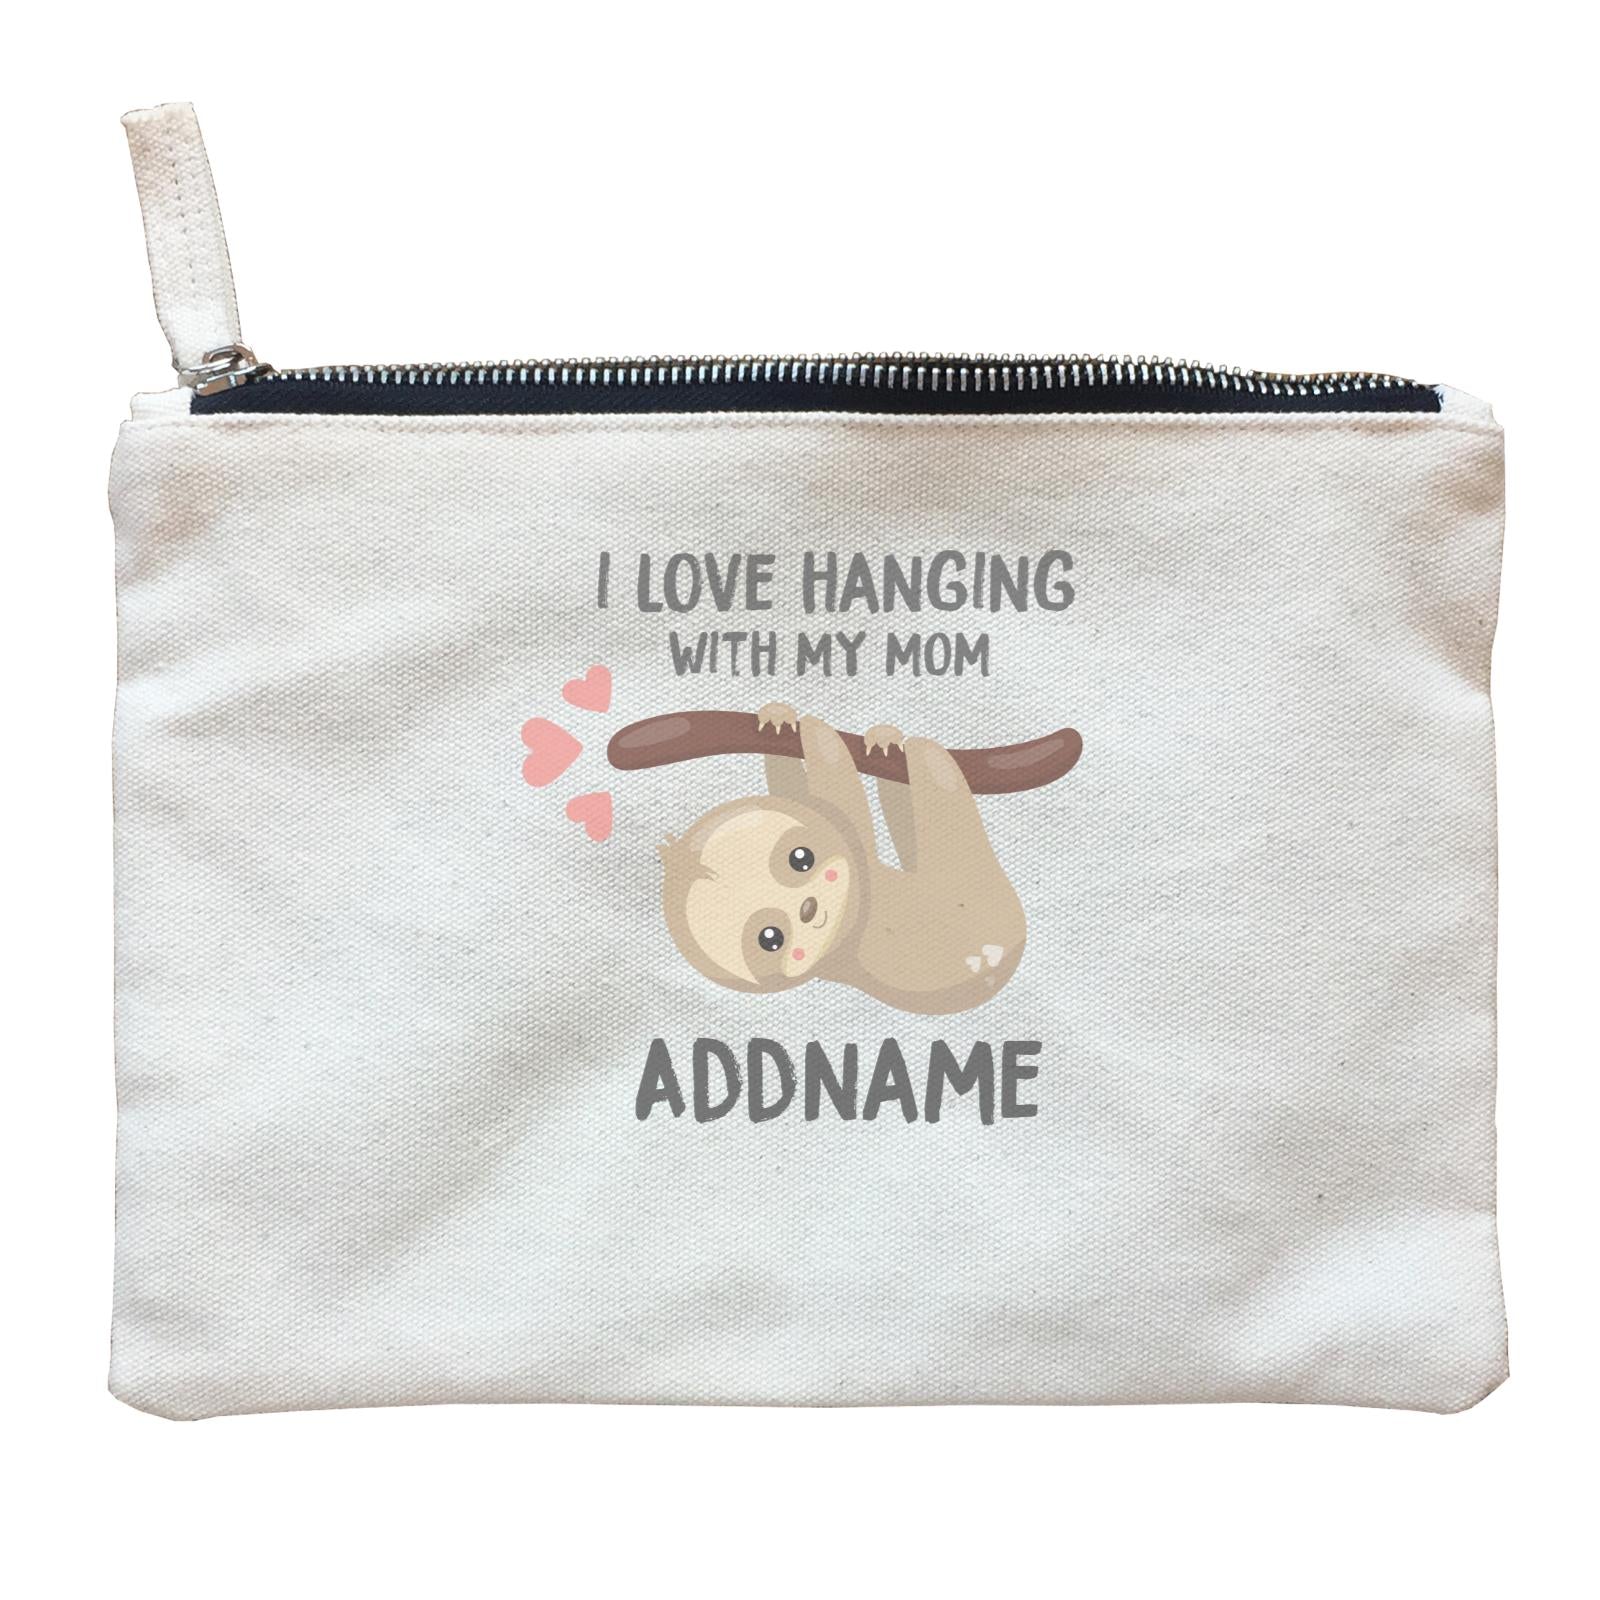 Cute Sloth I Love Hanging With My Mom Addname Zipper Pouch